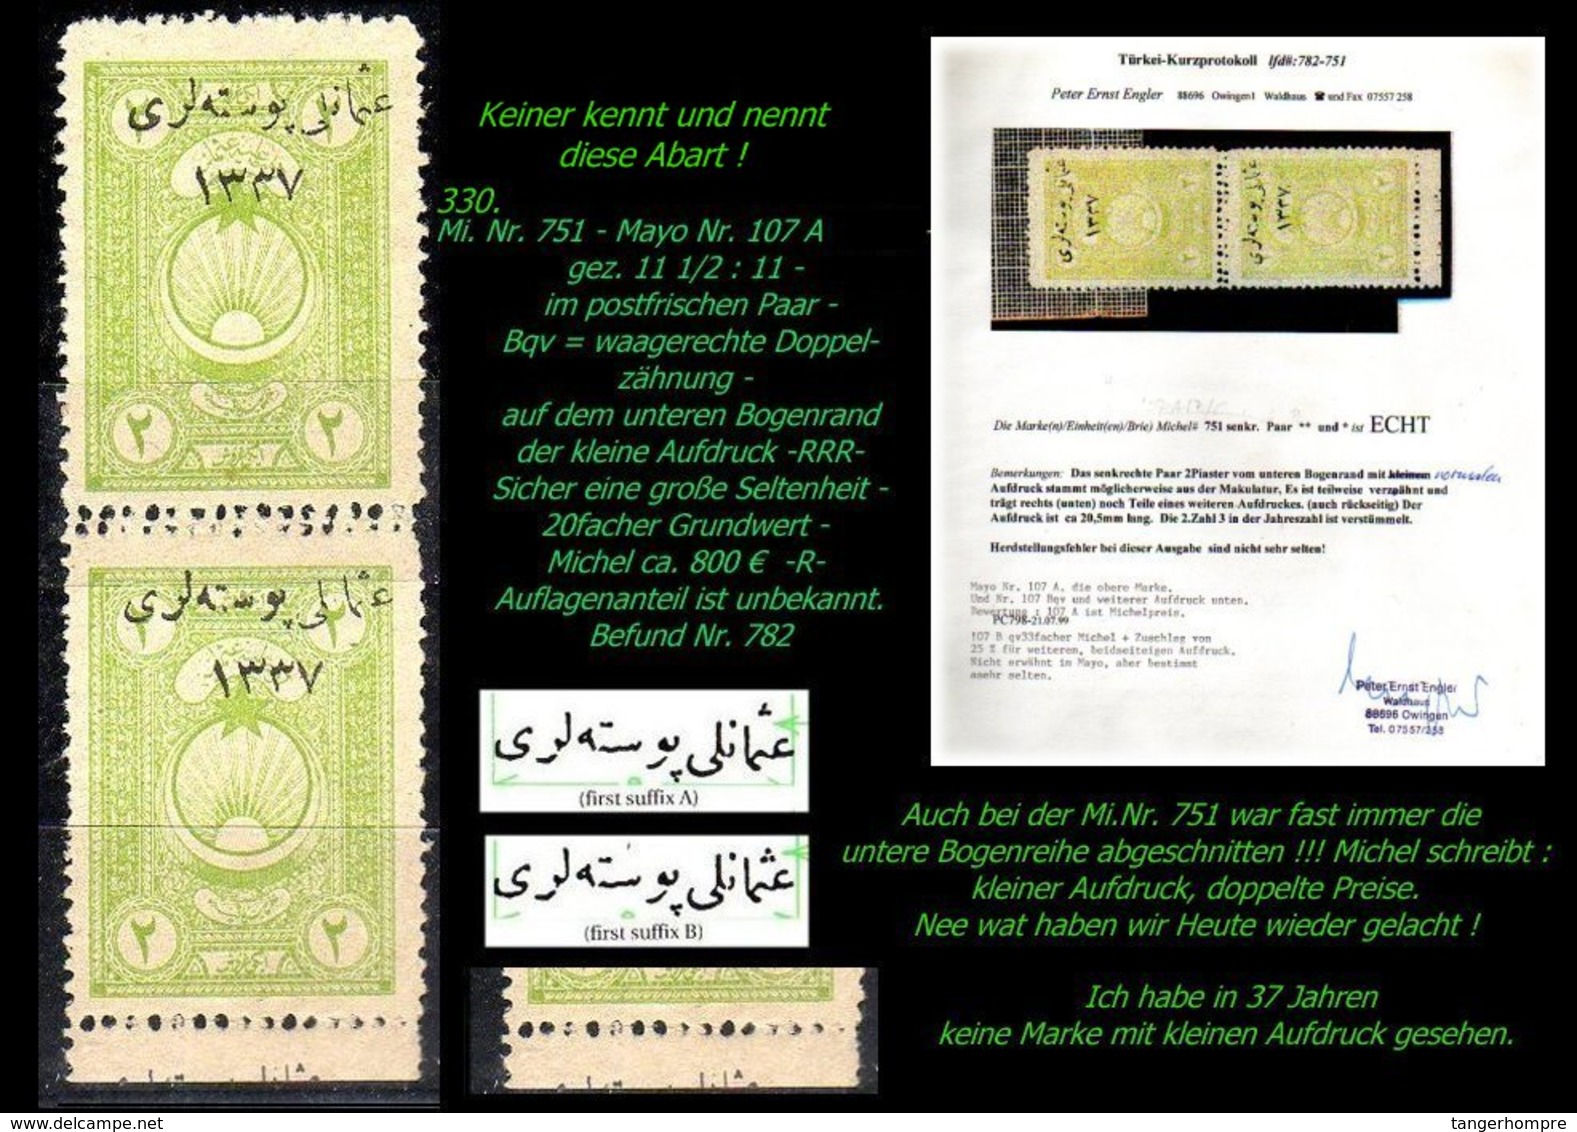 EARLY OTTOMAN SPECIALIZED FOR SPECIALIST, SEE...Mi. Nr. 751 - Mayo 107 A - Doppelzähnung Etc. -RRR- - 1920-21 Kleinasien